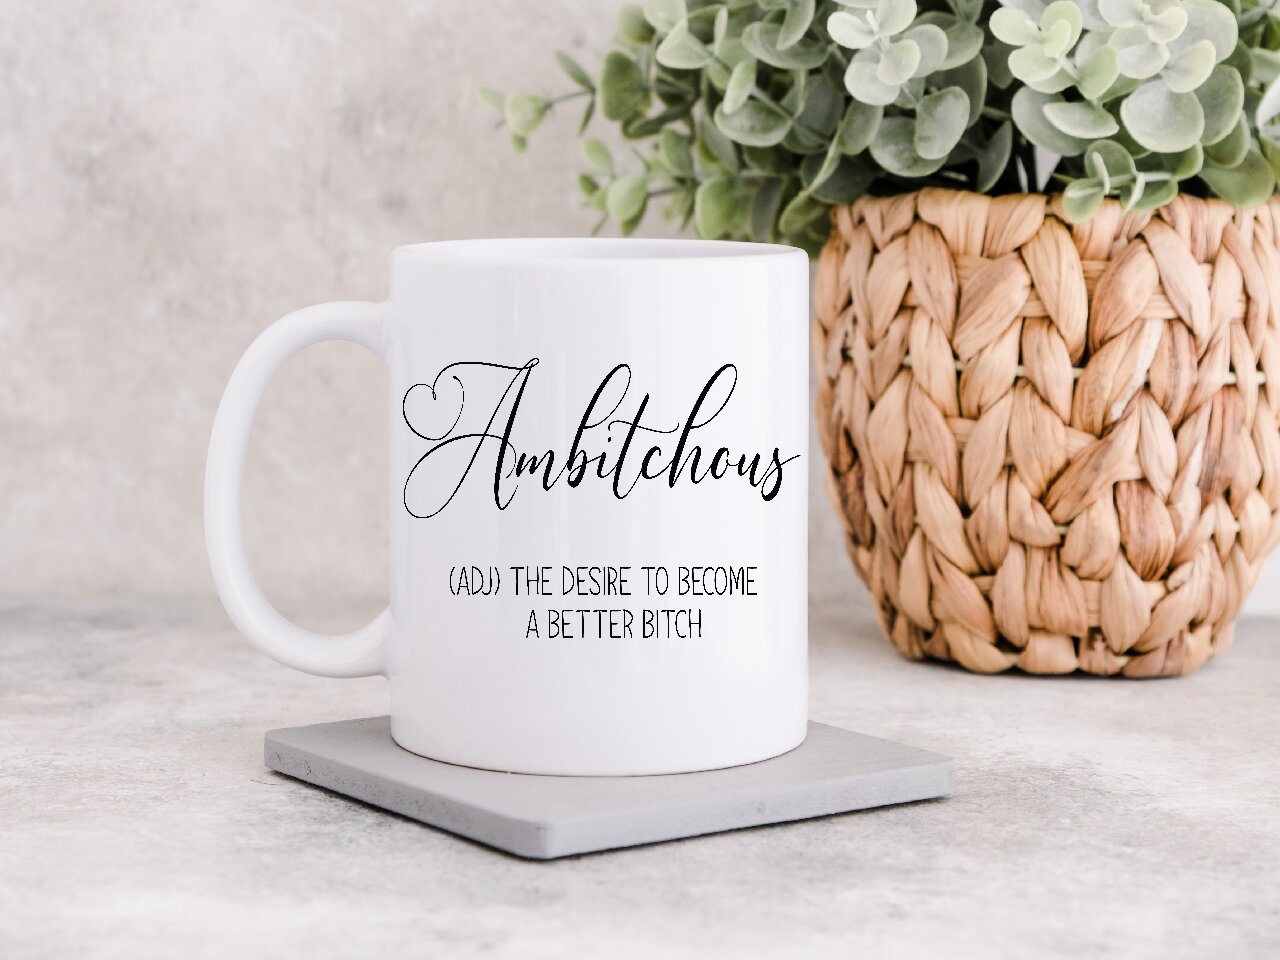 Ambitchous (ADJ) The Desire To Become A Better Bitch - Coffee Mug